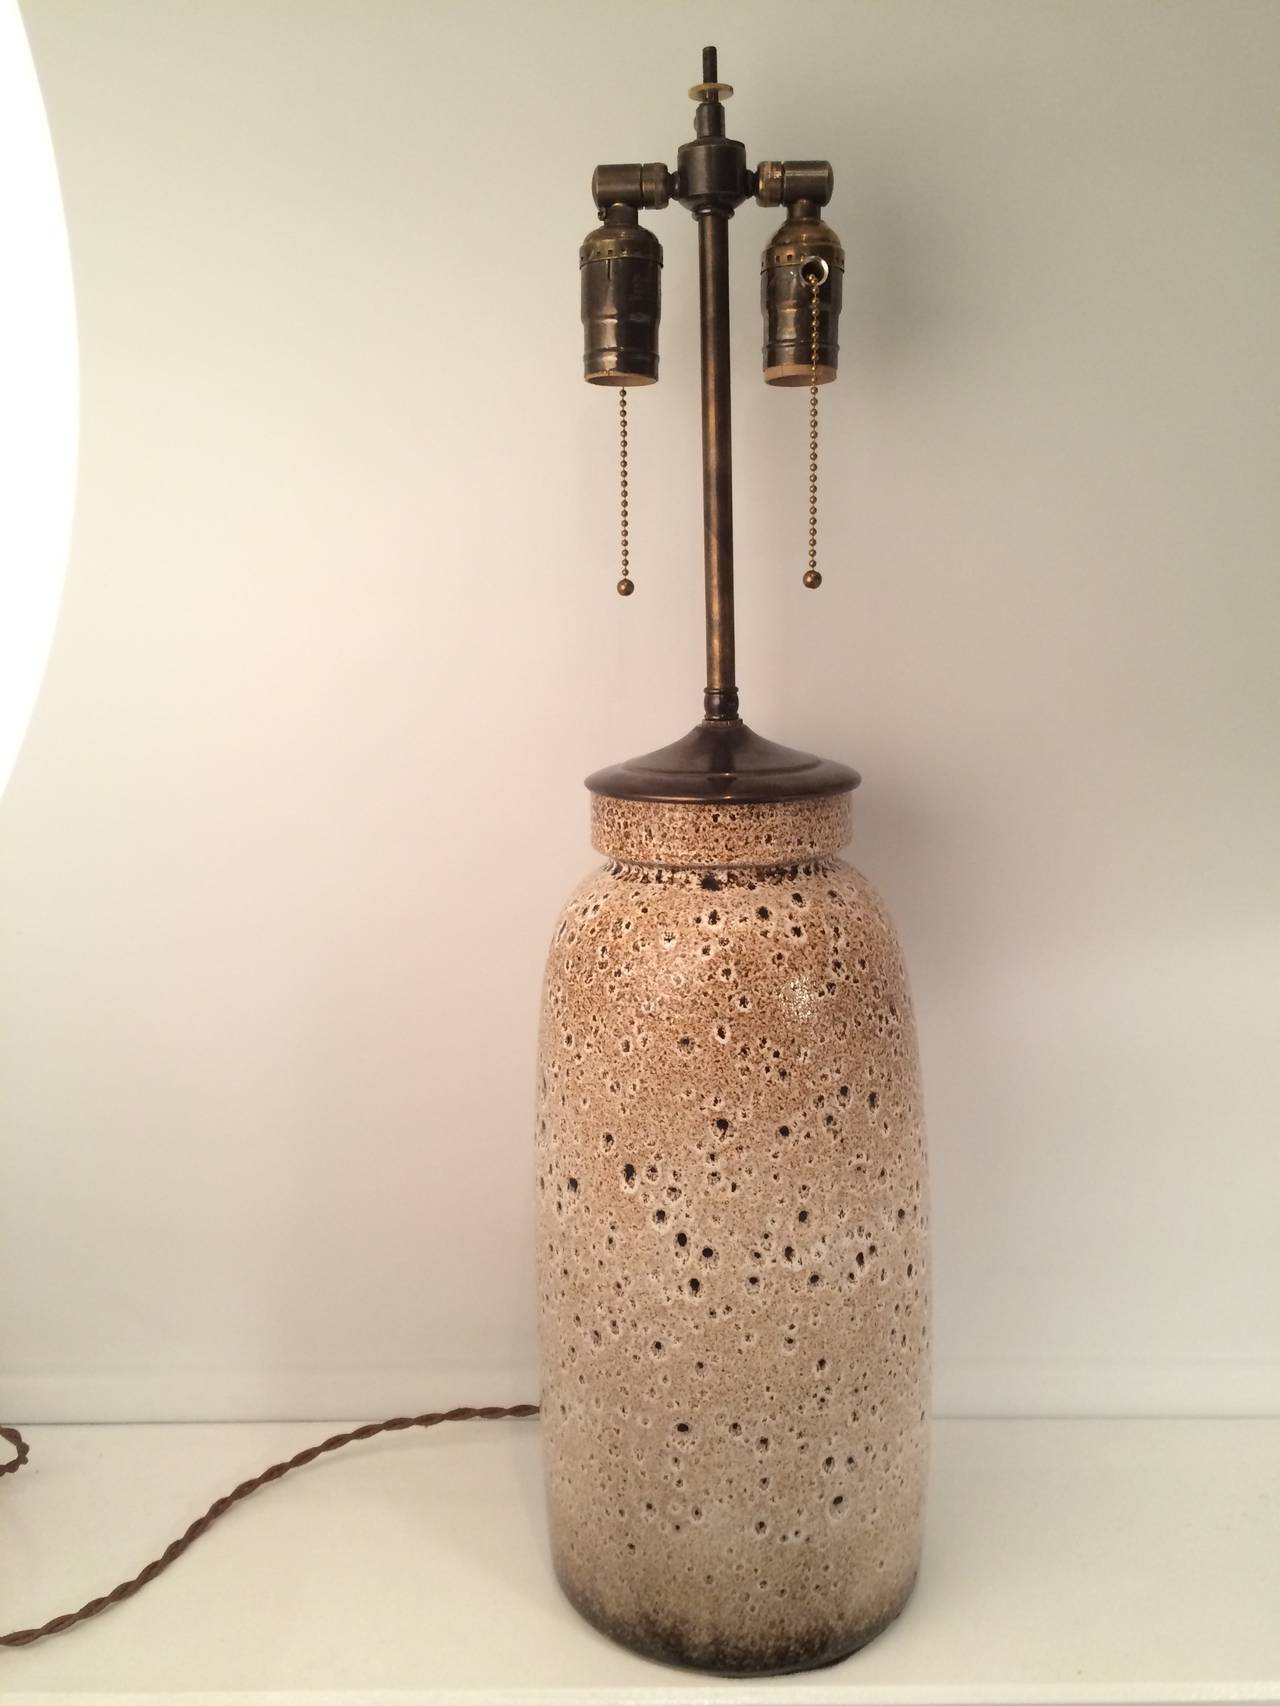 Beautifully glazed Scheurich West German Pottery vase mounted as a lamp. Double cluster socket with pull chains and a brown twisted silk cord.
Germany, 1960s.

Dimensions: Vase height is 15